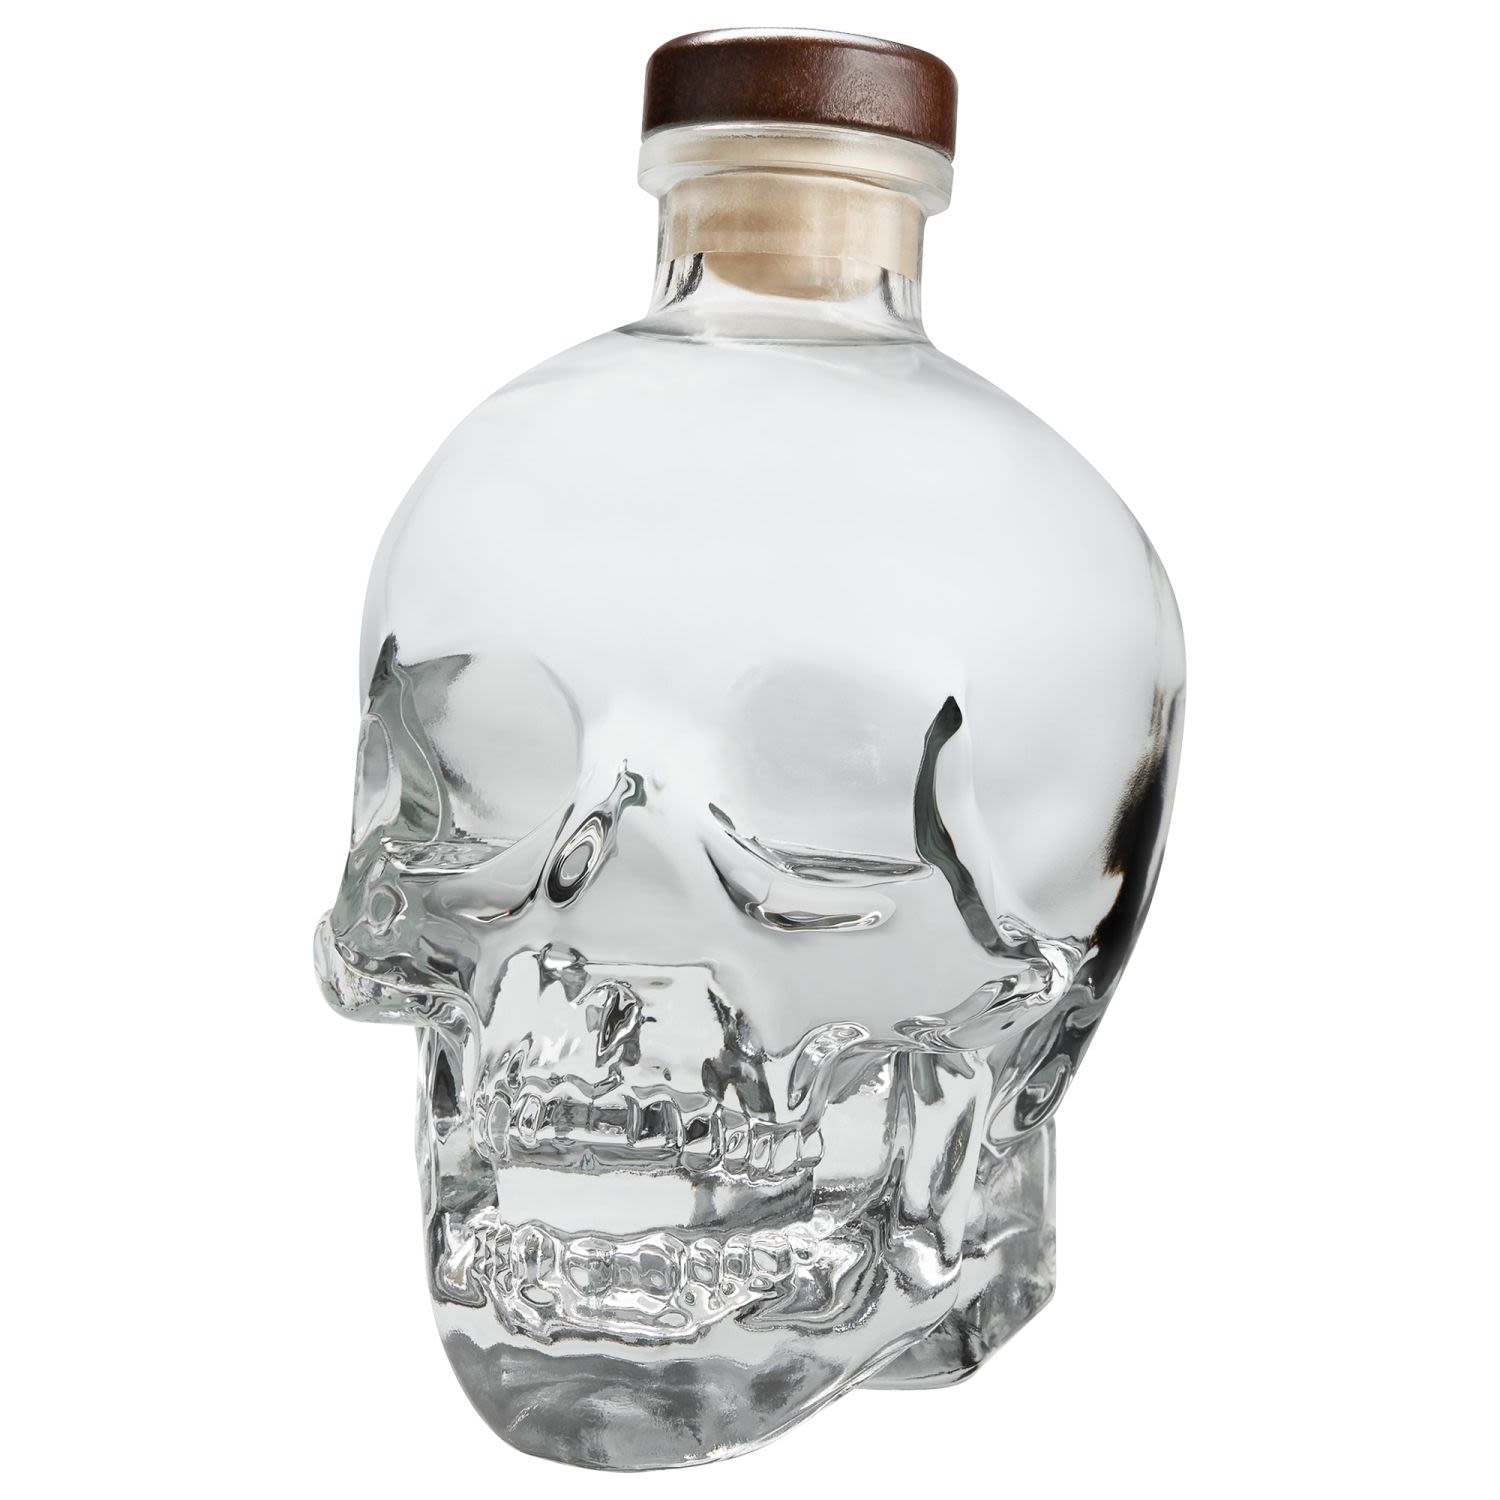 Produced in Newfoundland, Canada, Crystal Head is a multi-award winning, ultra-premium vodka that was created by actor, musician, and comedian Dan Aykroyd and renowned artist John Alexander. Crystal Head contains no additives and is naturally gluten-free. A clean, clear, colourless spirit. On the nose – neutral grain aromas with a delicate touch of citrus. Silky smooth with a hint of sweetness and vanilla. A sweet, creamy finish.<br /> <br />Alcohol Volume: 40.00%<br /><br />Pack Format: Bottle<br /><br />Standard Drinks: 22</br /><br />Pack Type: Bottle<br /><br />Country of Origin: Canada<br />